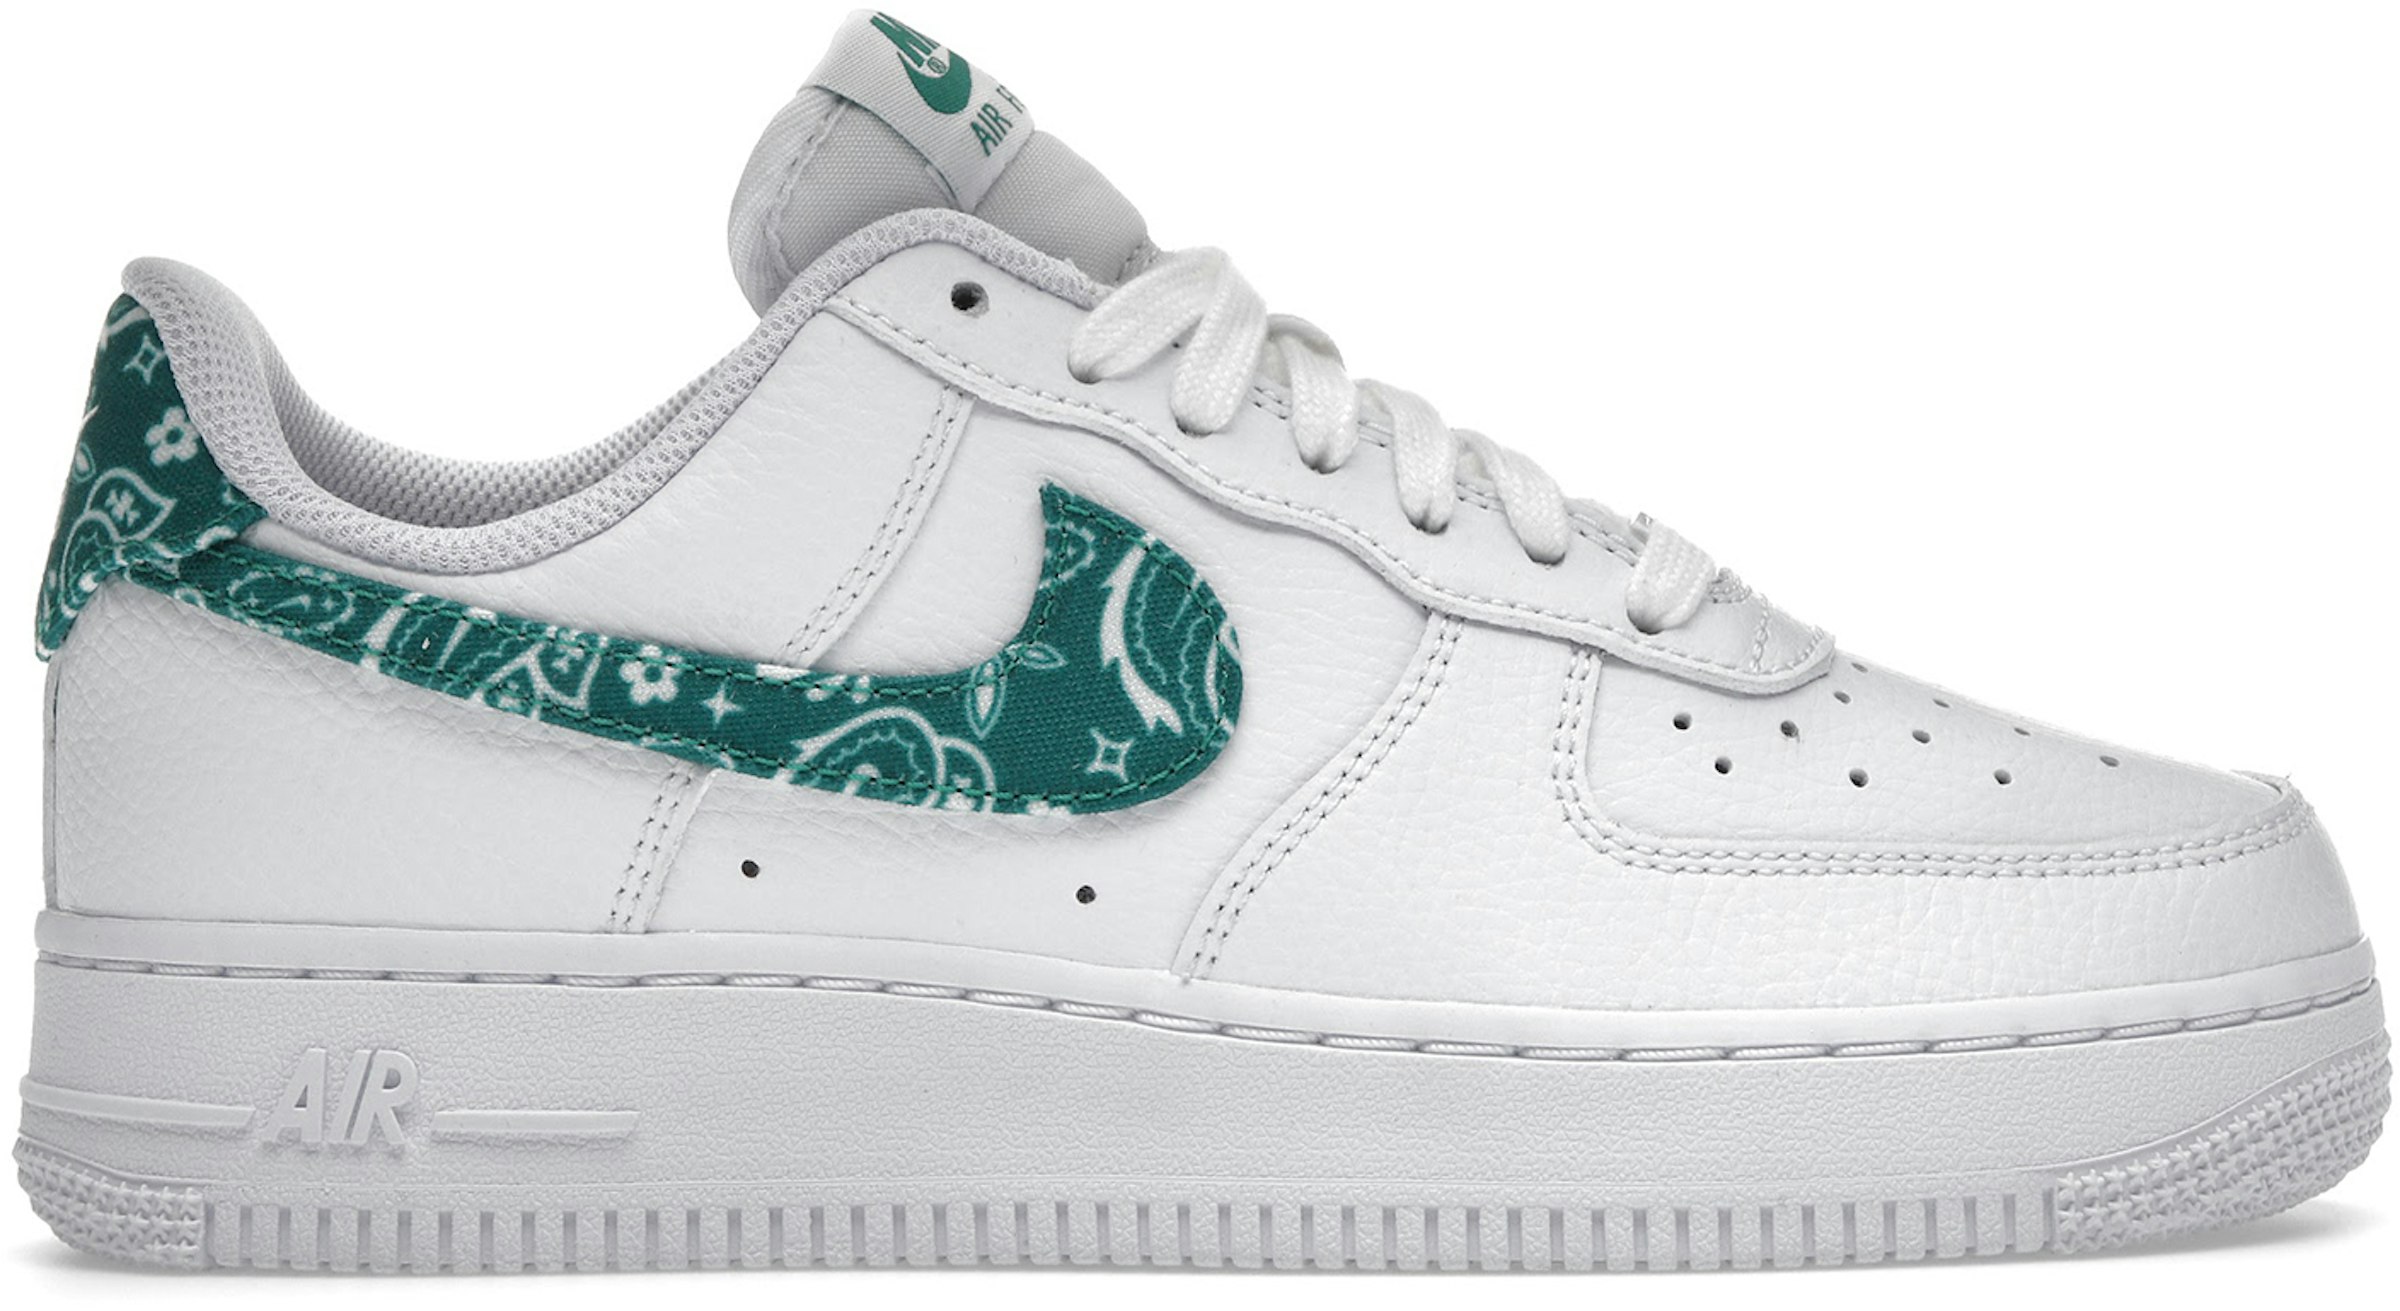 Air Force 1 Low '07 Essential White Green Paisley (Women's) DH4406-102 US